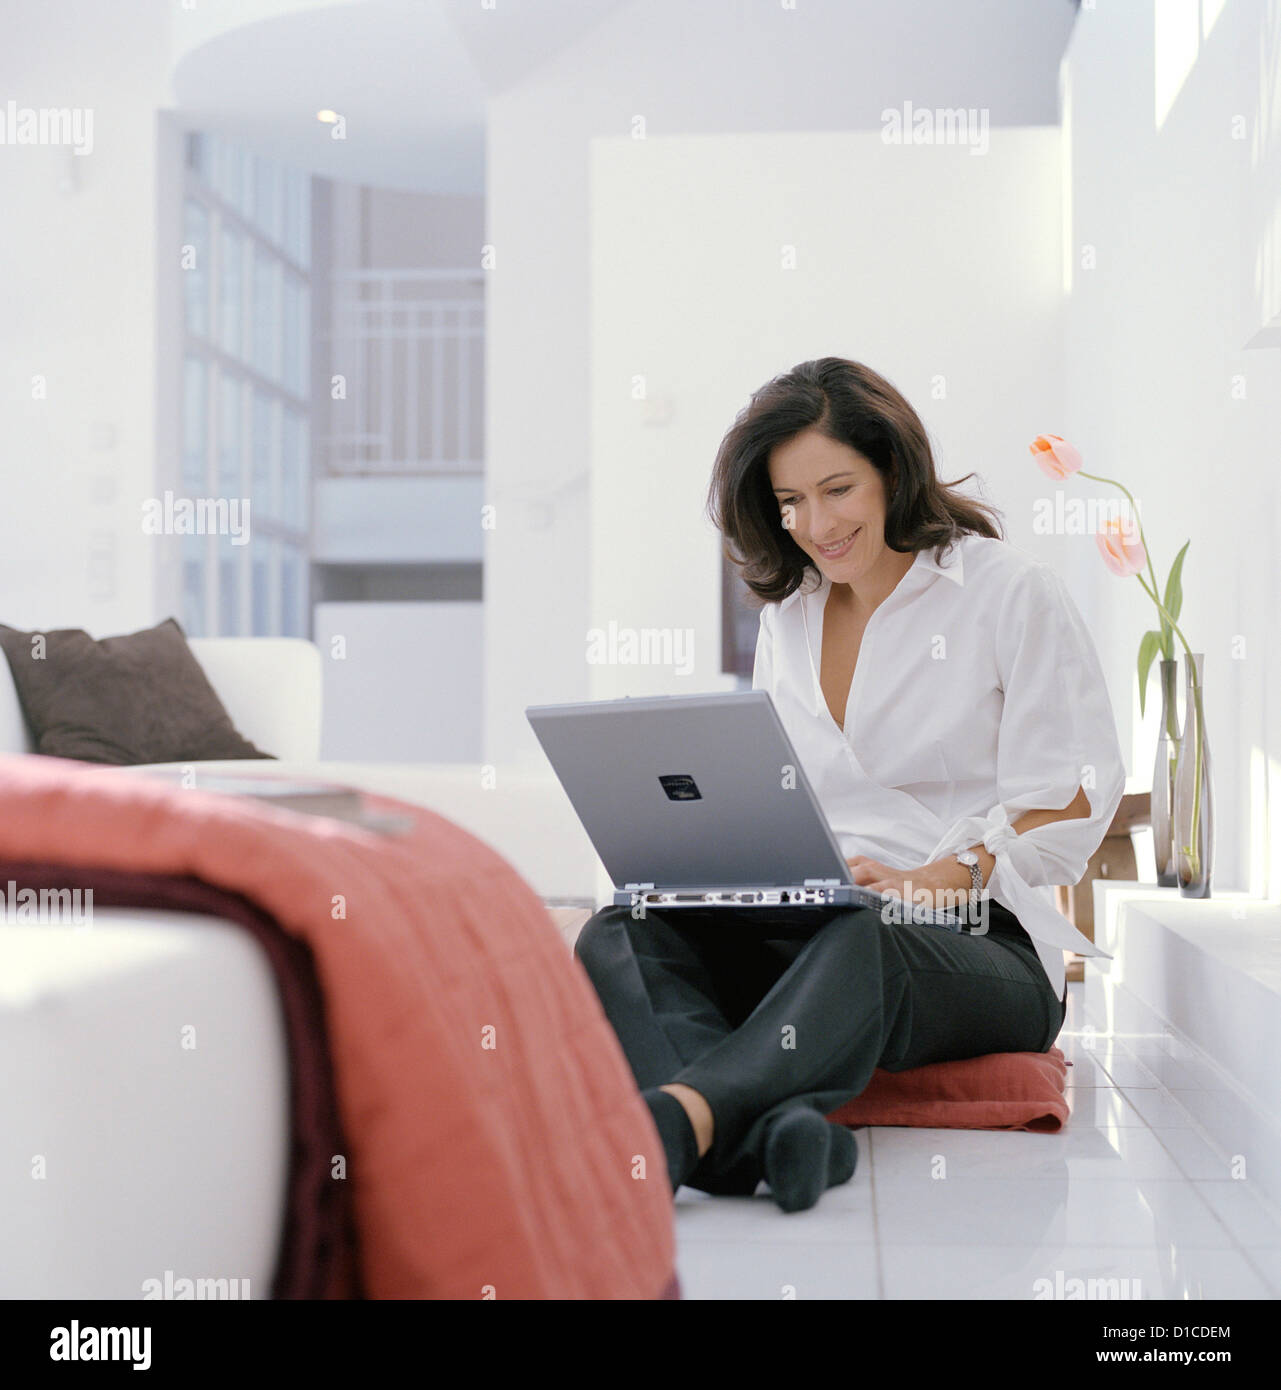 A happy woman surfing on a laptop at home License free except ads and billboards Stock Photo